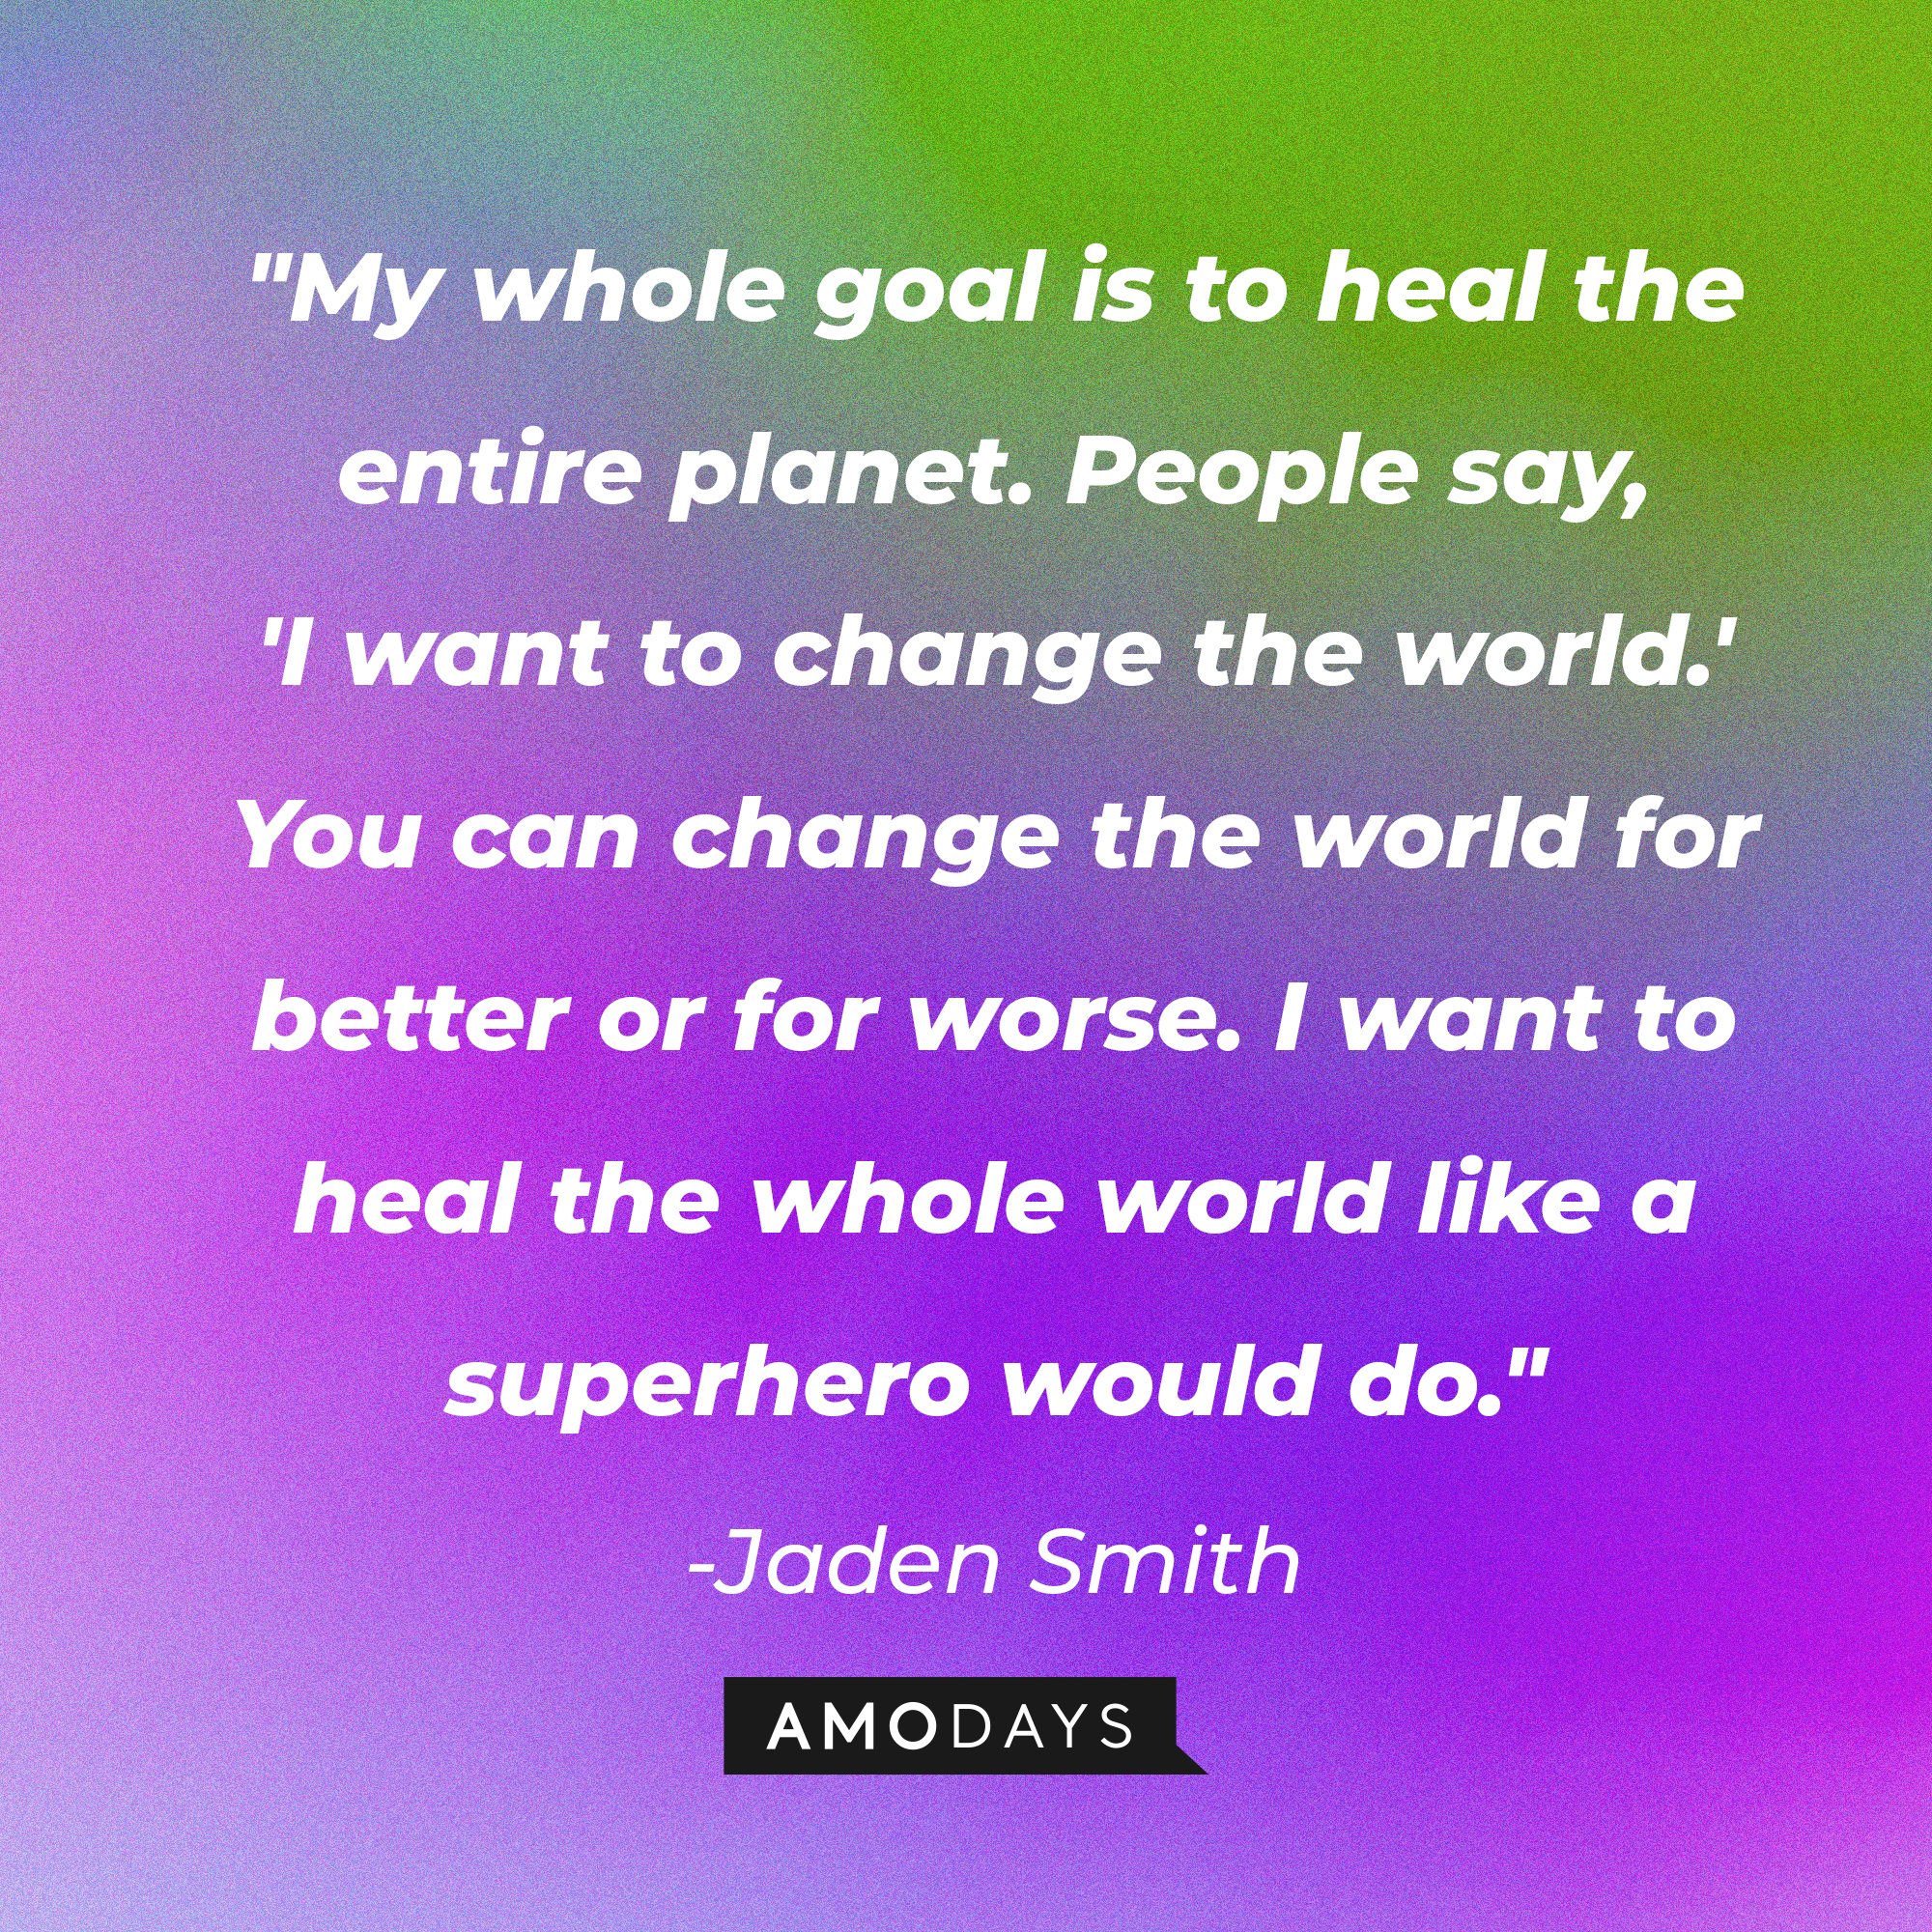 Jaden Smith's quote: "My whole goal is to heal the entire planet. People say, 'I want to change the world.' You can change the world for better or for worse. I want to heal the whole world like a superhero would do." | Image: AmoDays